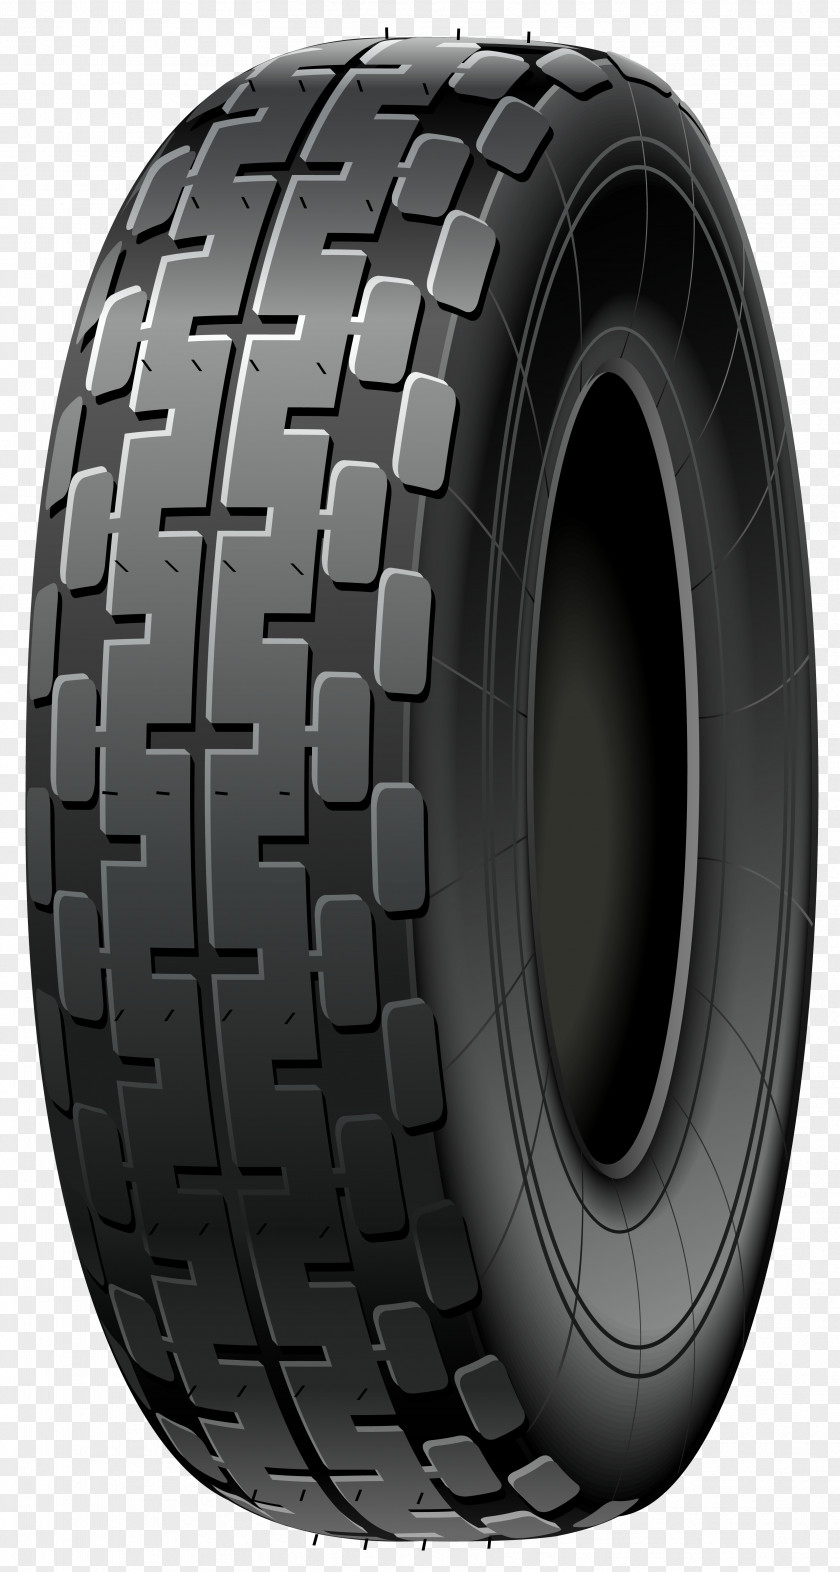 Car Goodyear Tire And Rubber Company Tread PNG